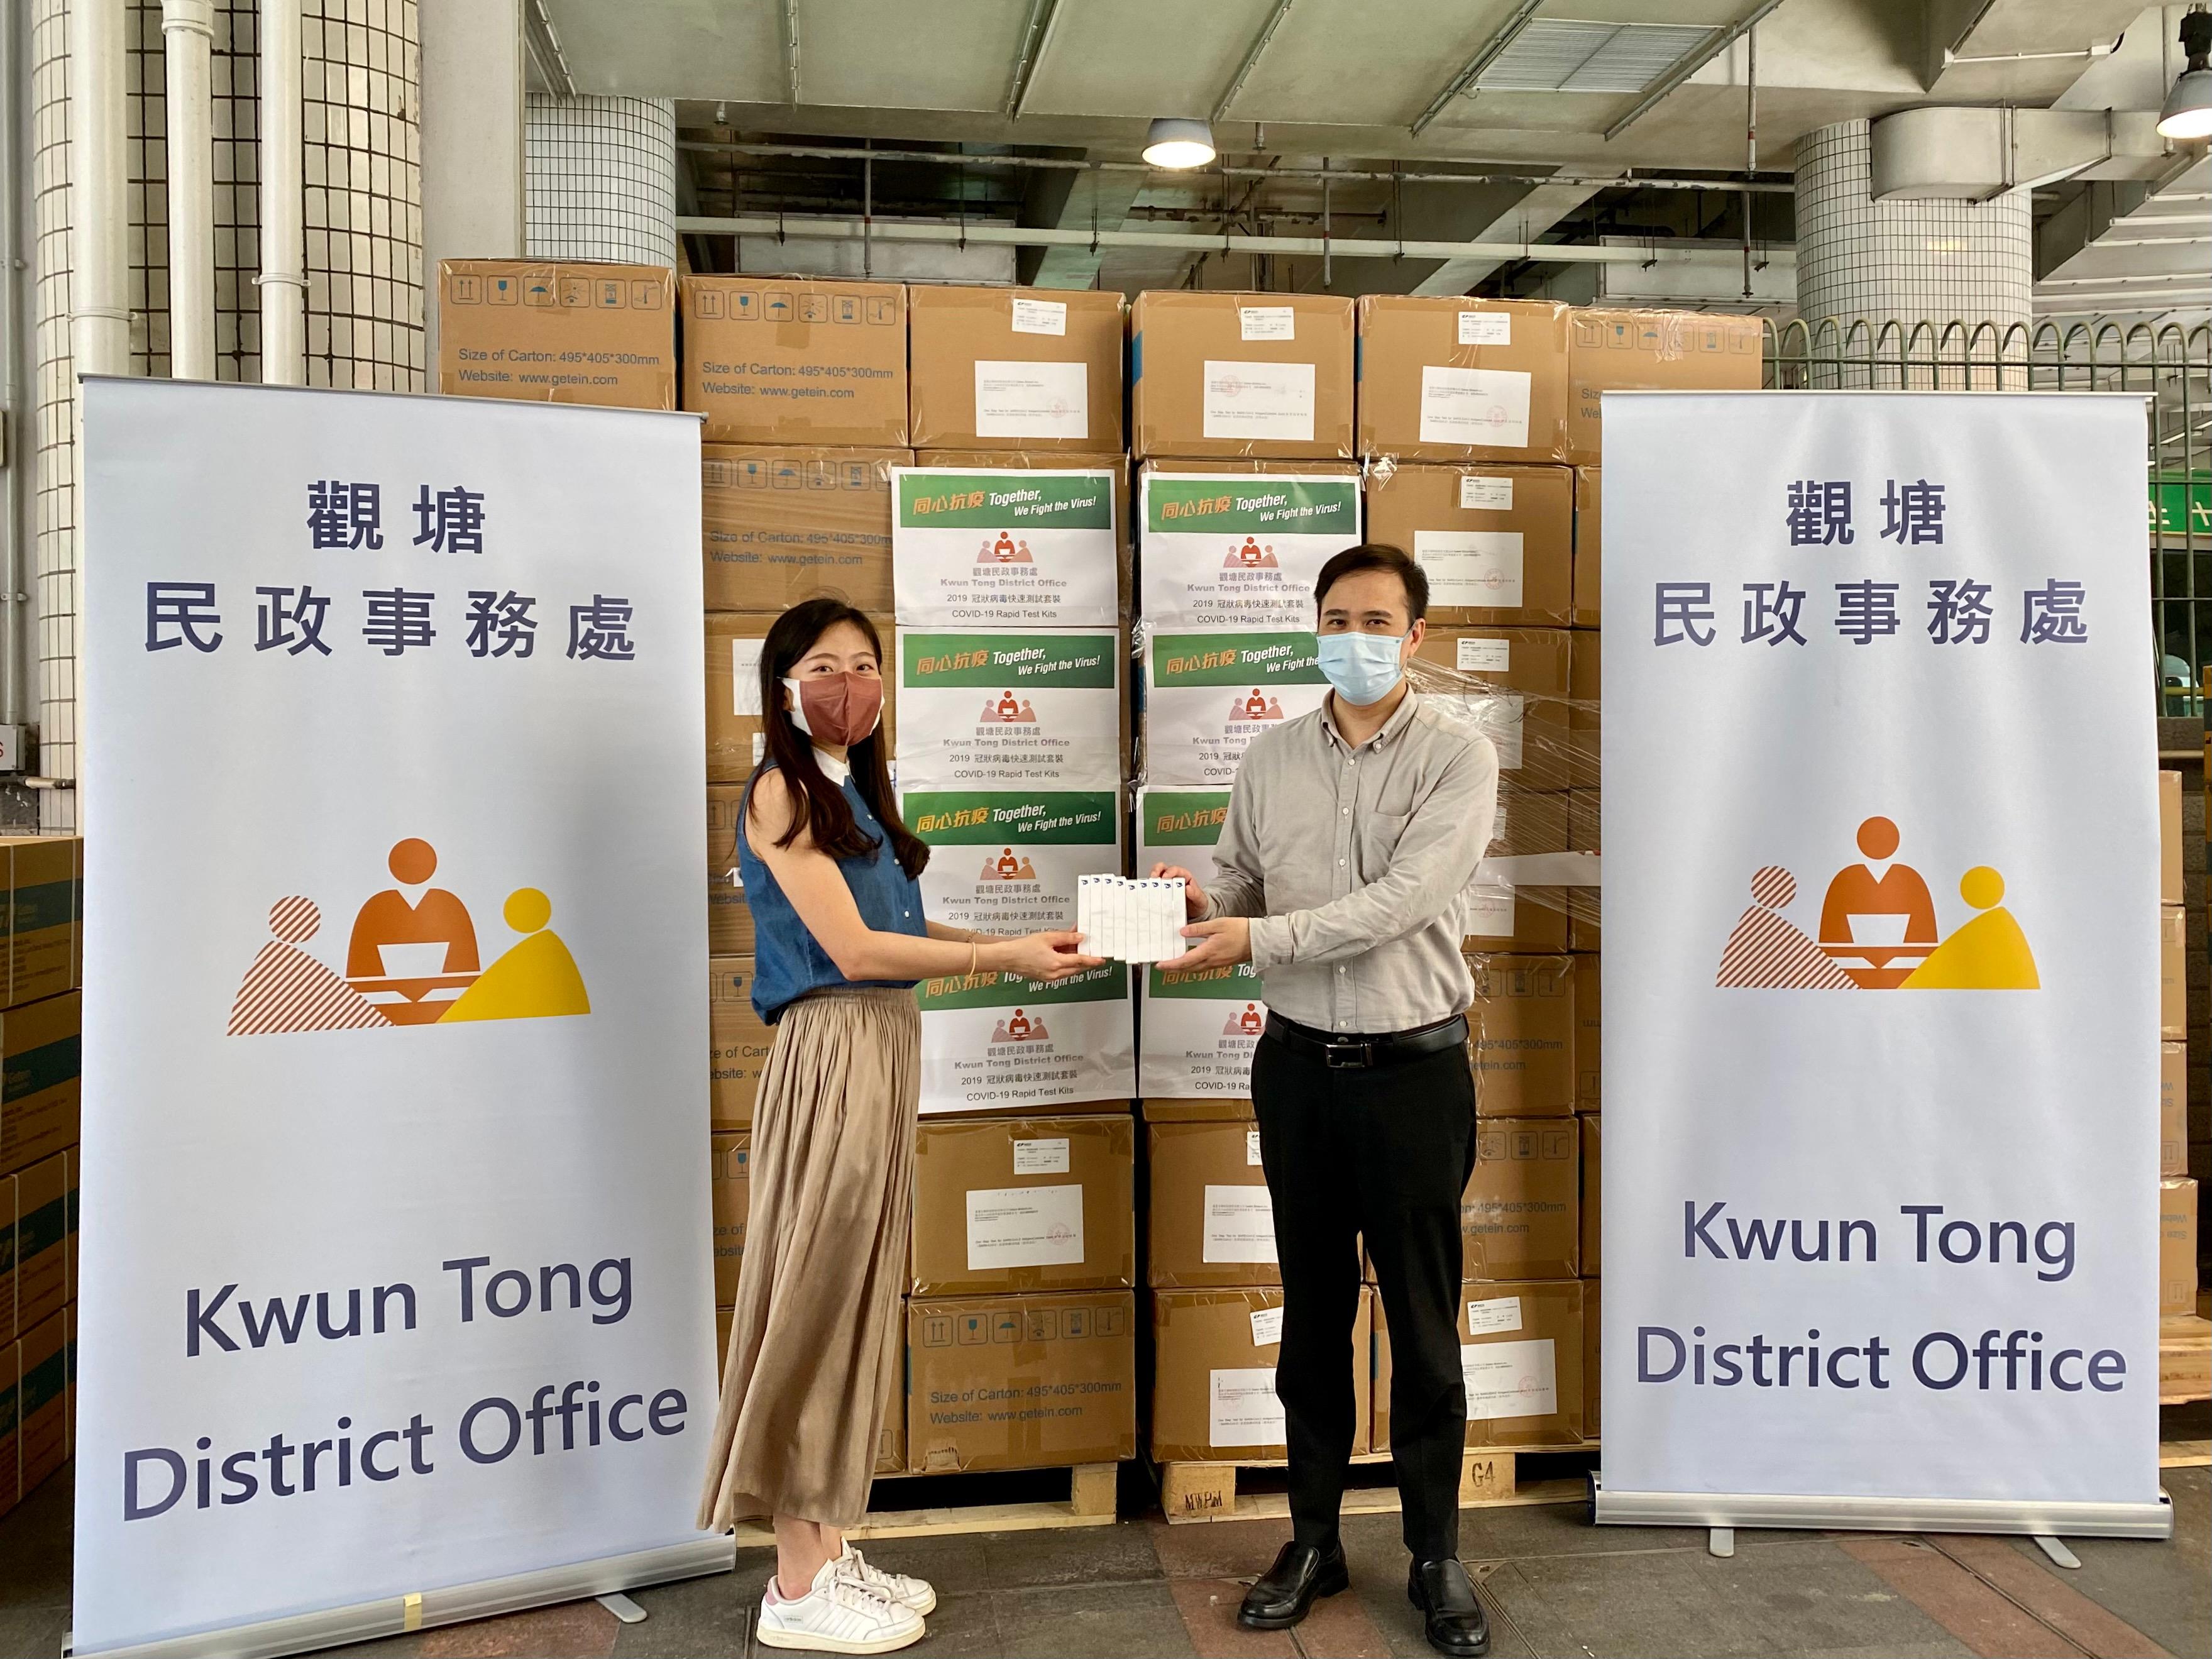 The Kwun Tong District Office today (July 20) distributed COVID-19 rapid test kits to households, cleansing workers and property management staff living and working in  Hiu Kwong Court and Hiu Ming Court for voluntary testing through the property management company.

